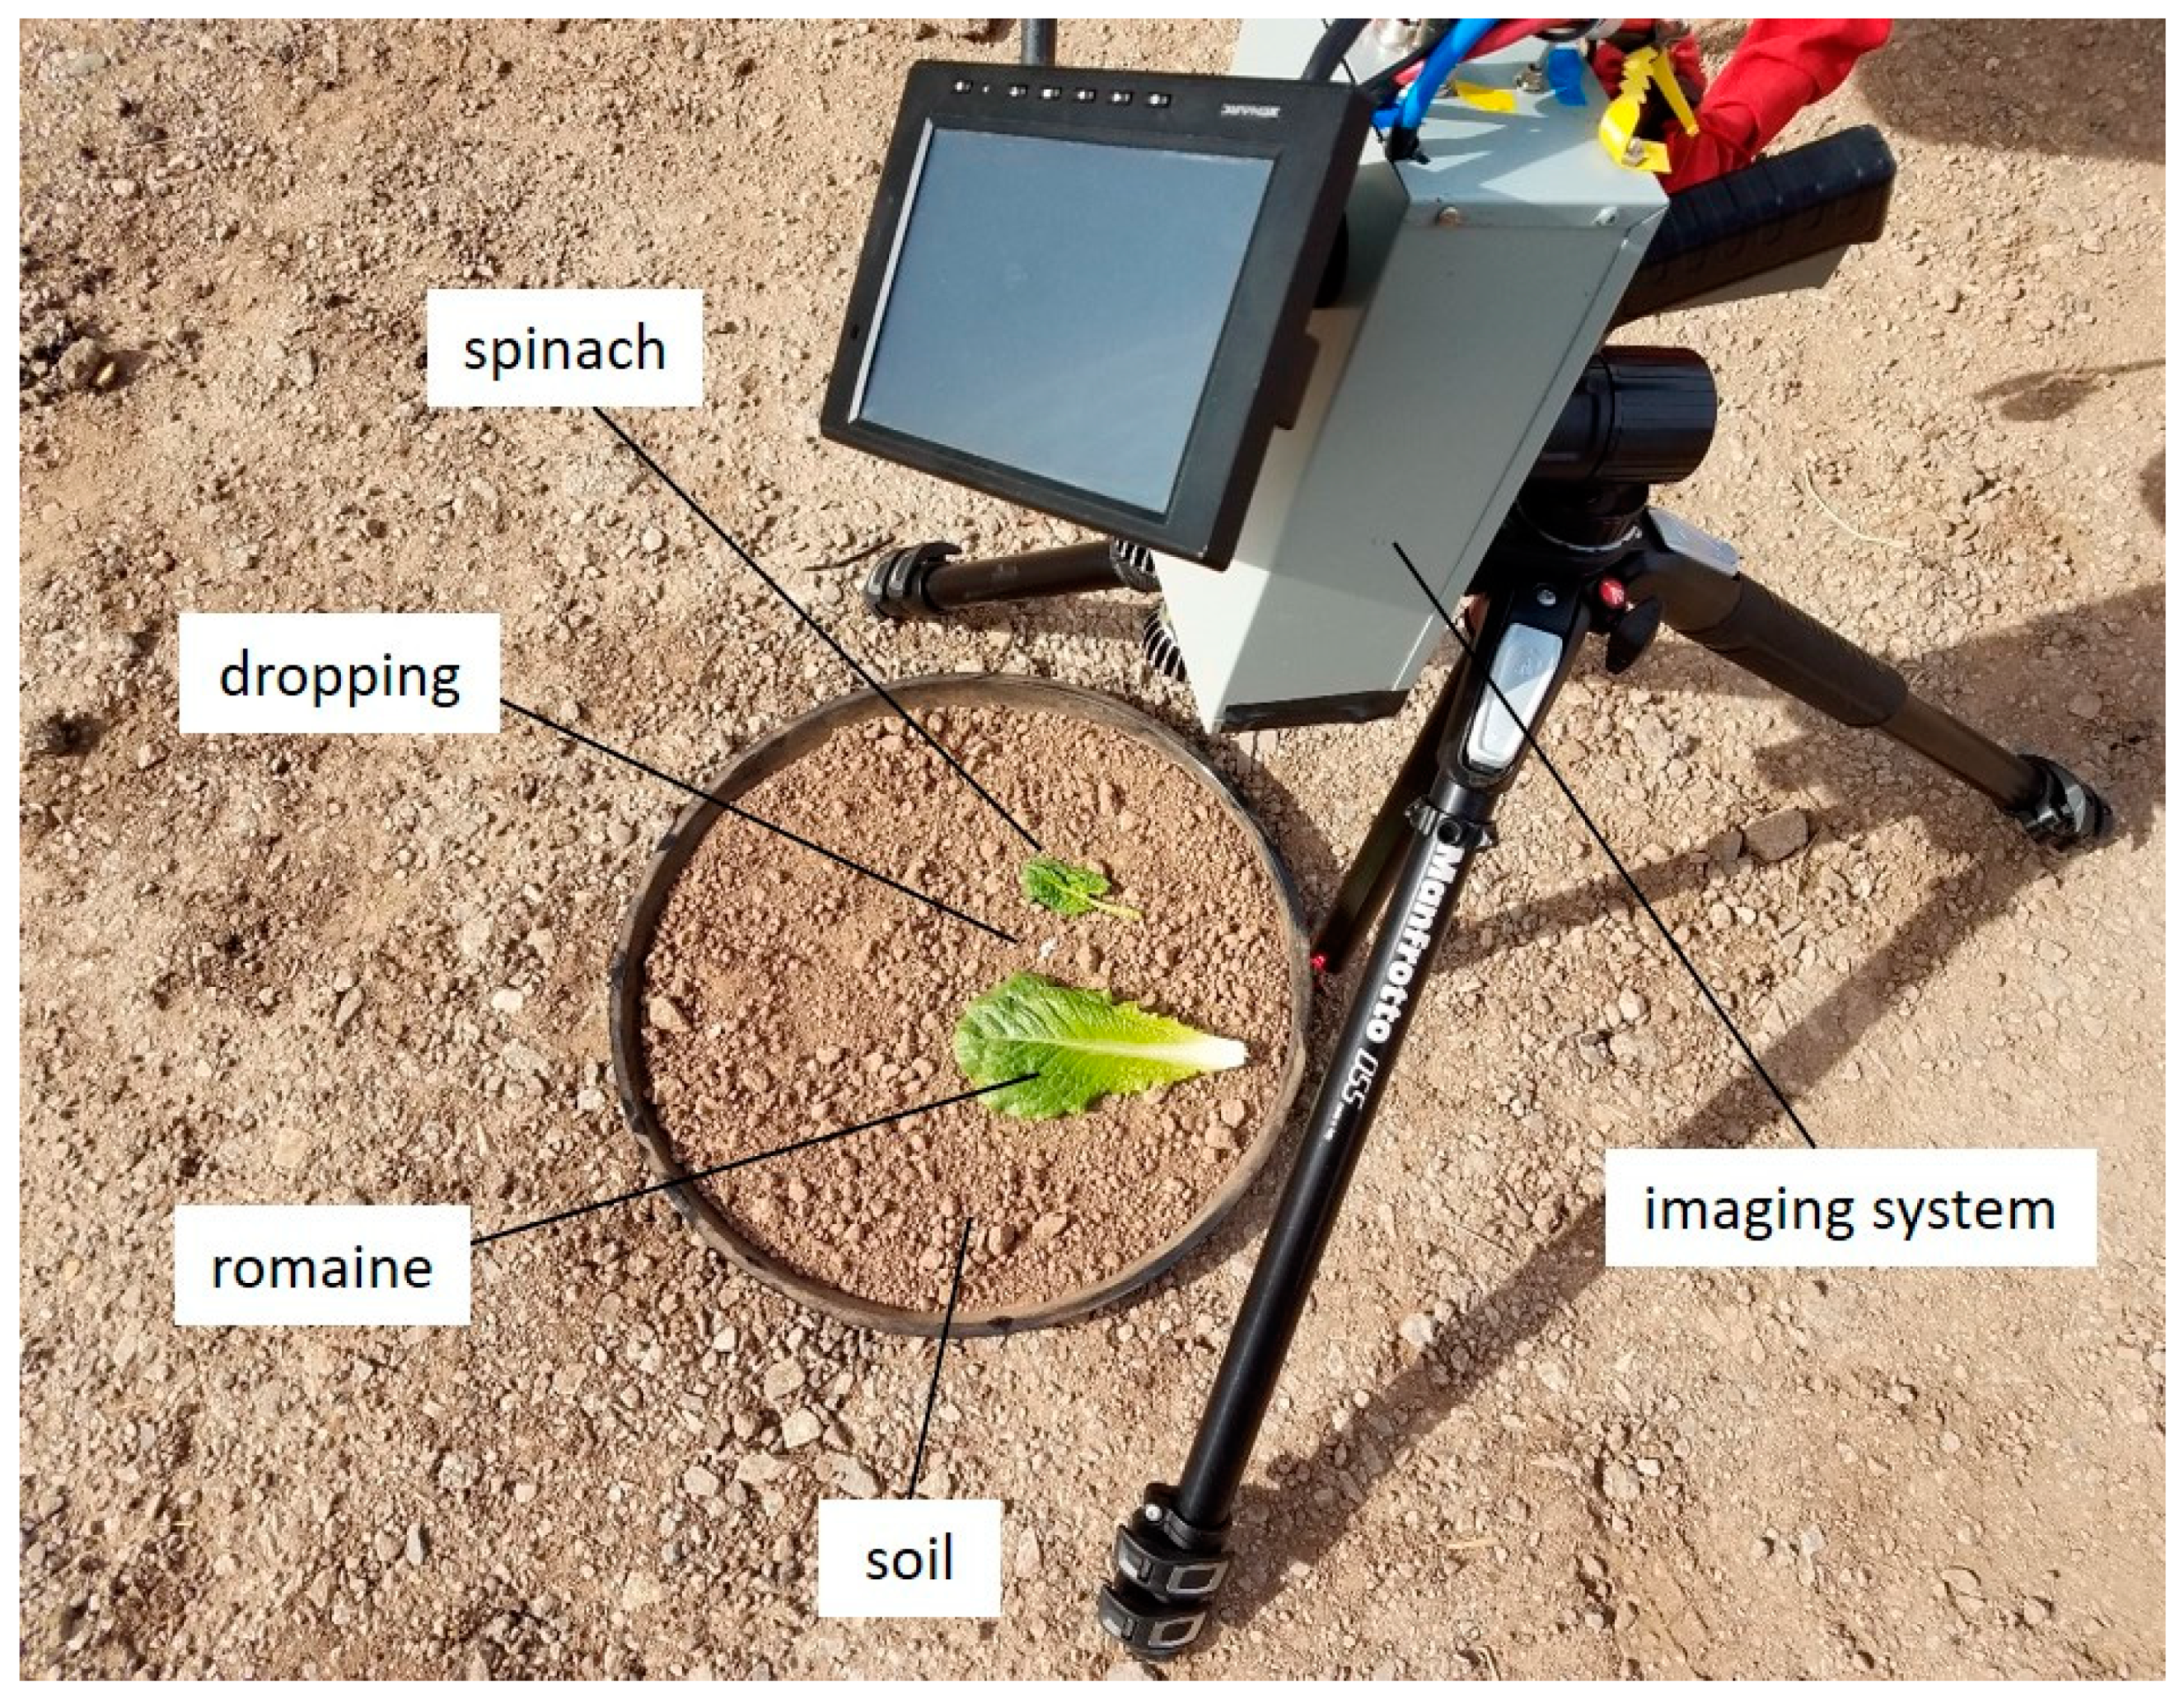 Applied Sciences | Free Full-Text | Optical Parameters for Using  Visible-Wavelength Reflectance or Fluorescence Imaging to Detect Bird  Excrements in Produce Fields